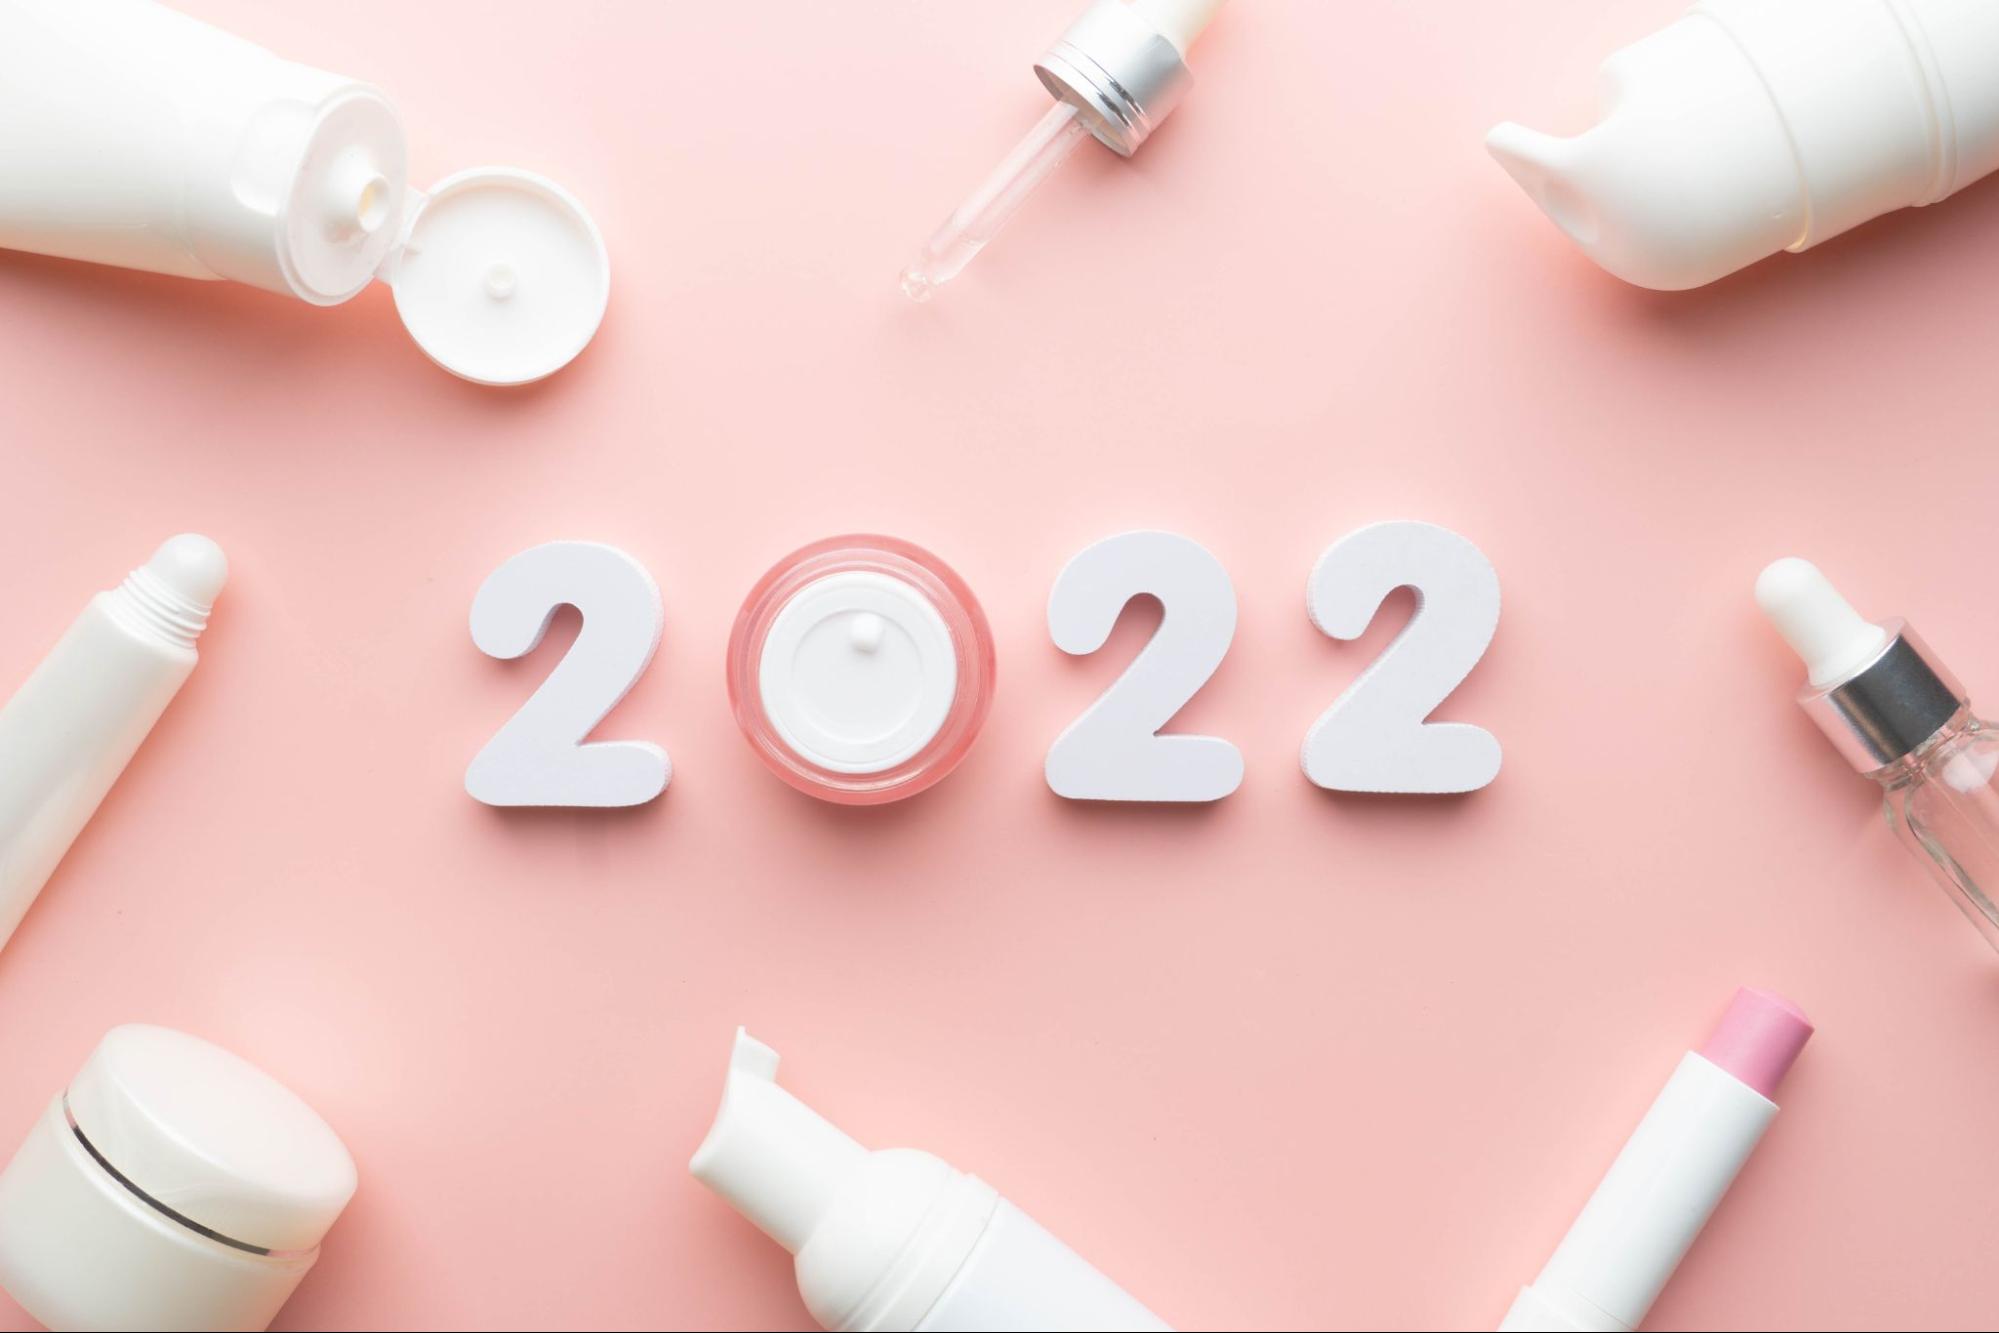 2022 surrounded by beauty products to represent Beauty Trends for 2022